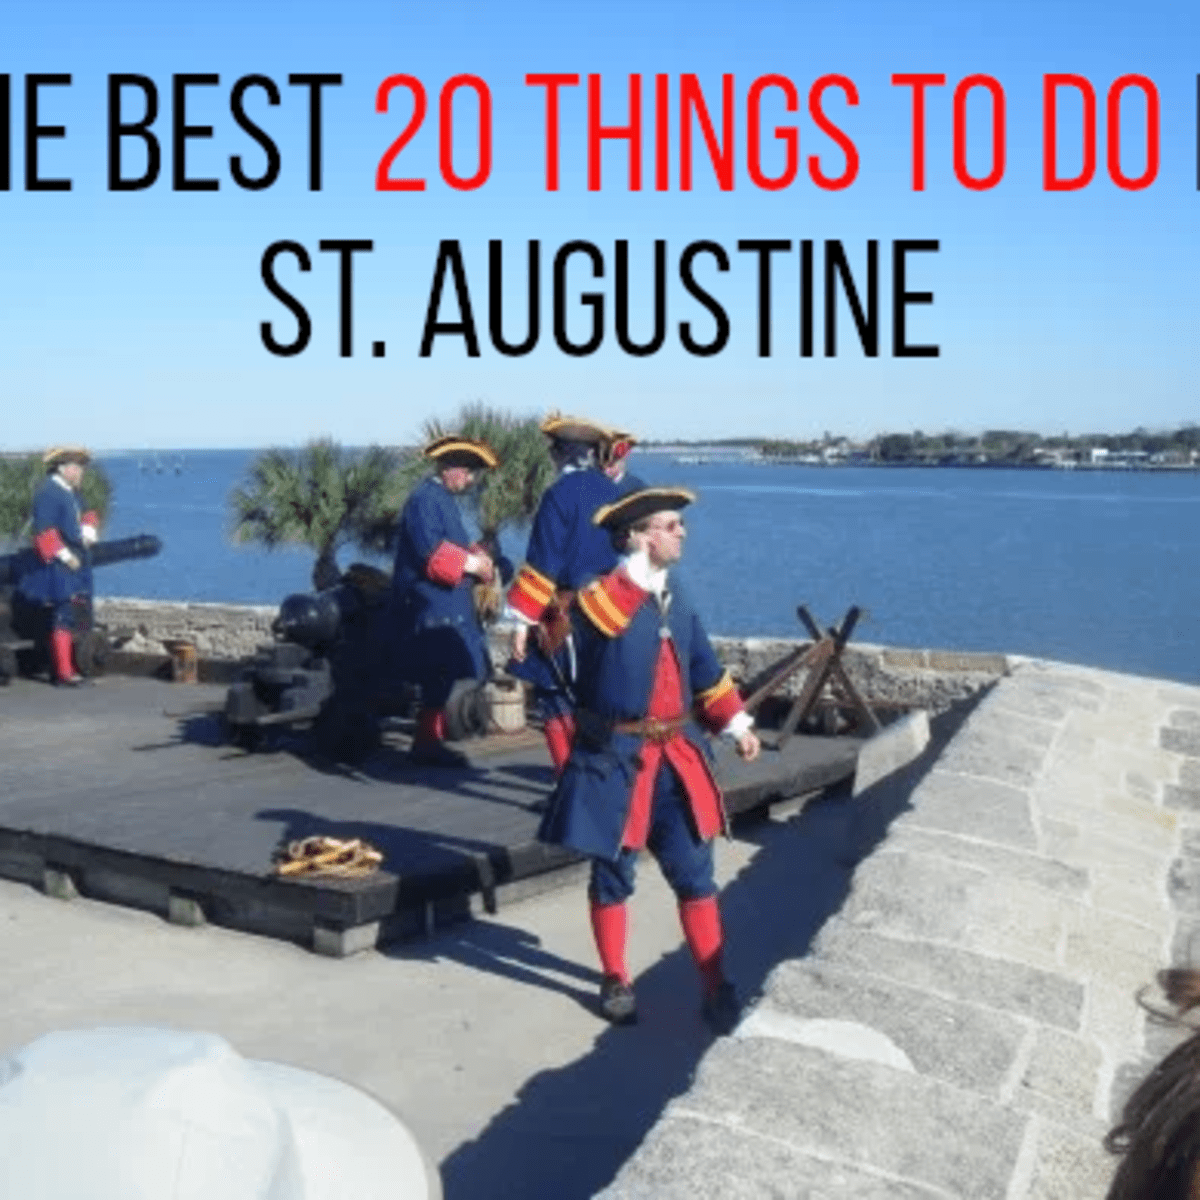 Sites to augustine see st Historical Sites